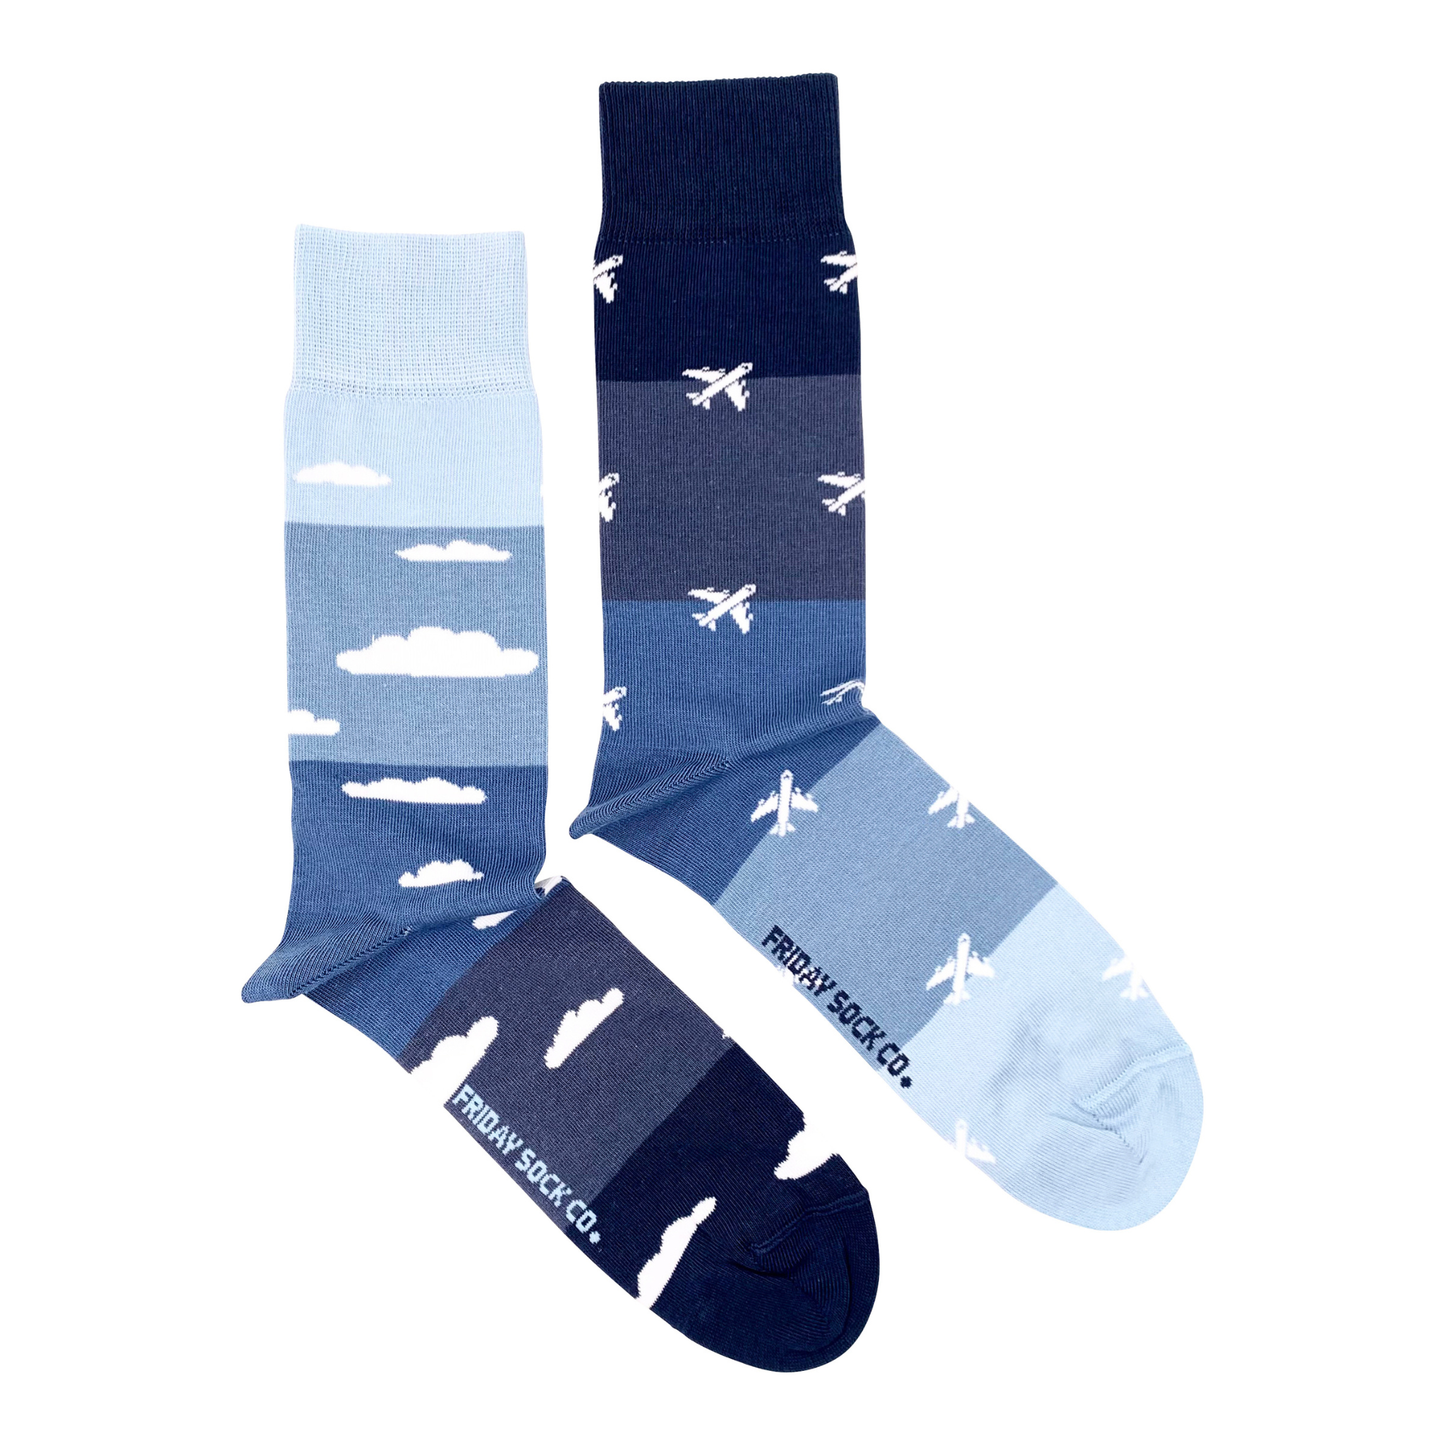 Men’s Socks | Planes & Clouds | Travel | Ethically Made